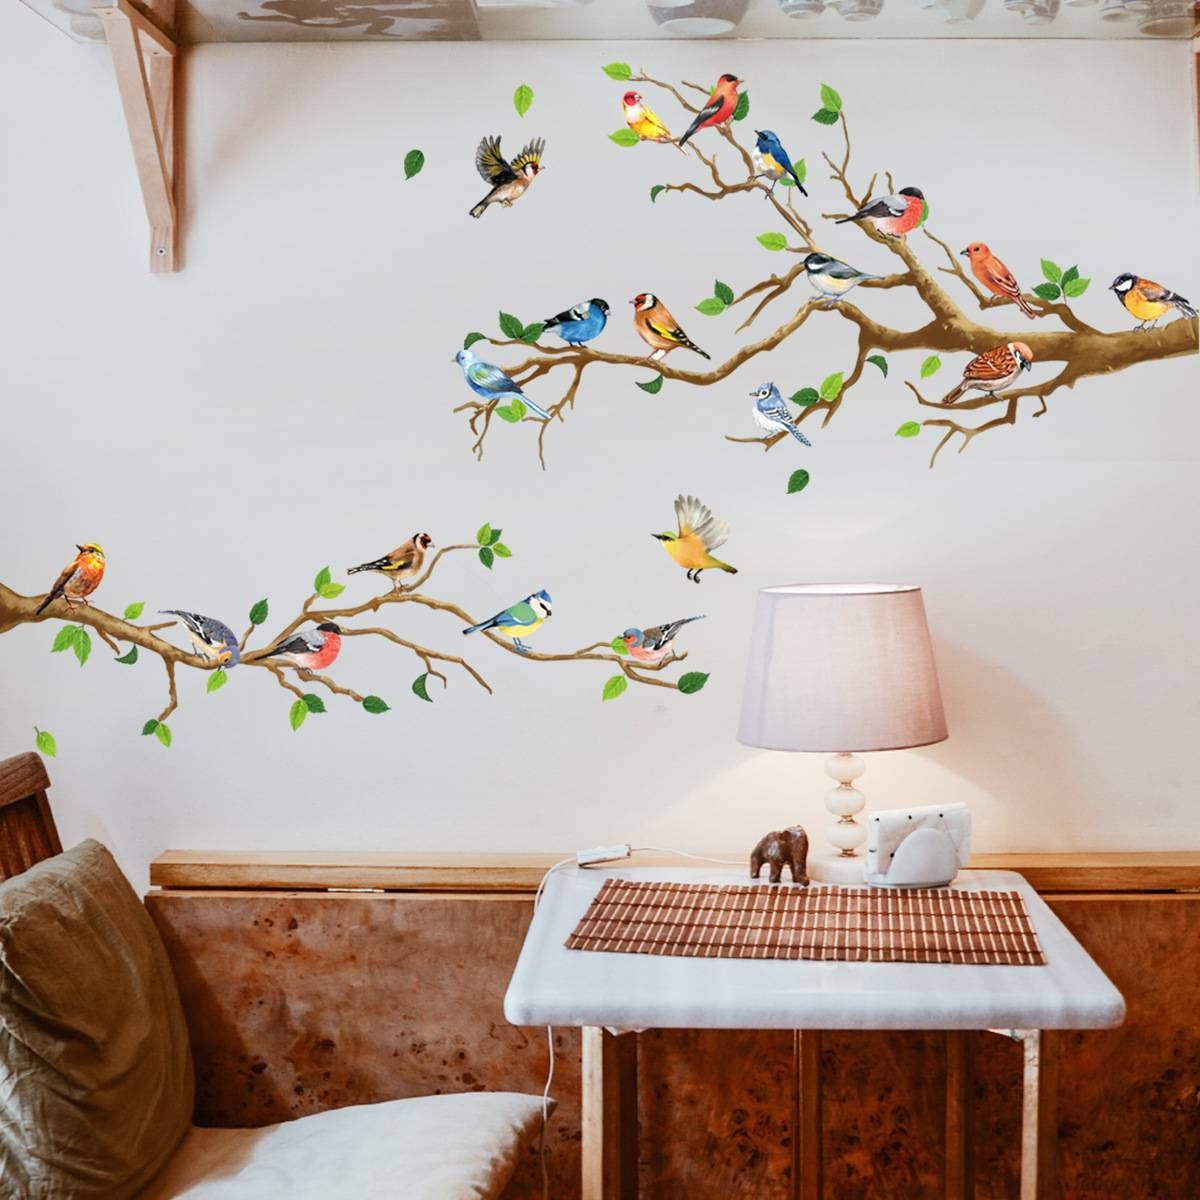 Tropical Colorful Birds Animals Tree Branches Background Wall Art  Decoration Pvc Removable Sticker In Best And Newest Colorful Branching Wall Art (Gallery 20 of 20)